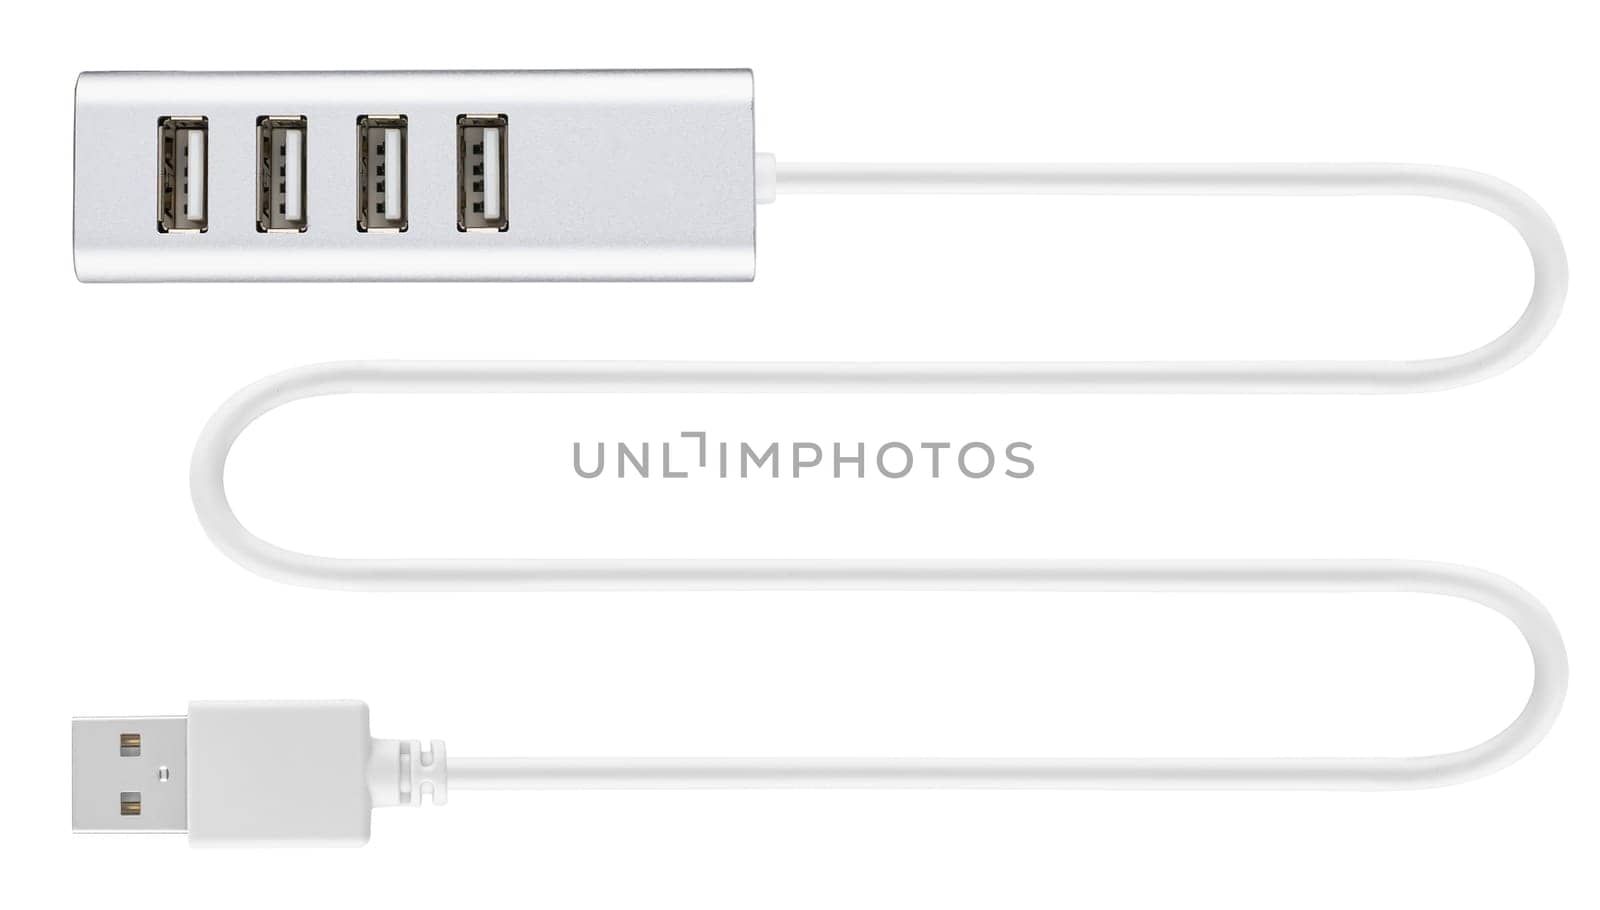 USB hub for four USB ports, on white background in insulation by A_A